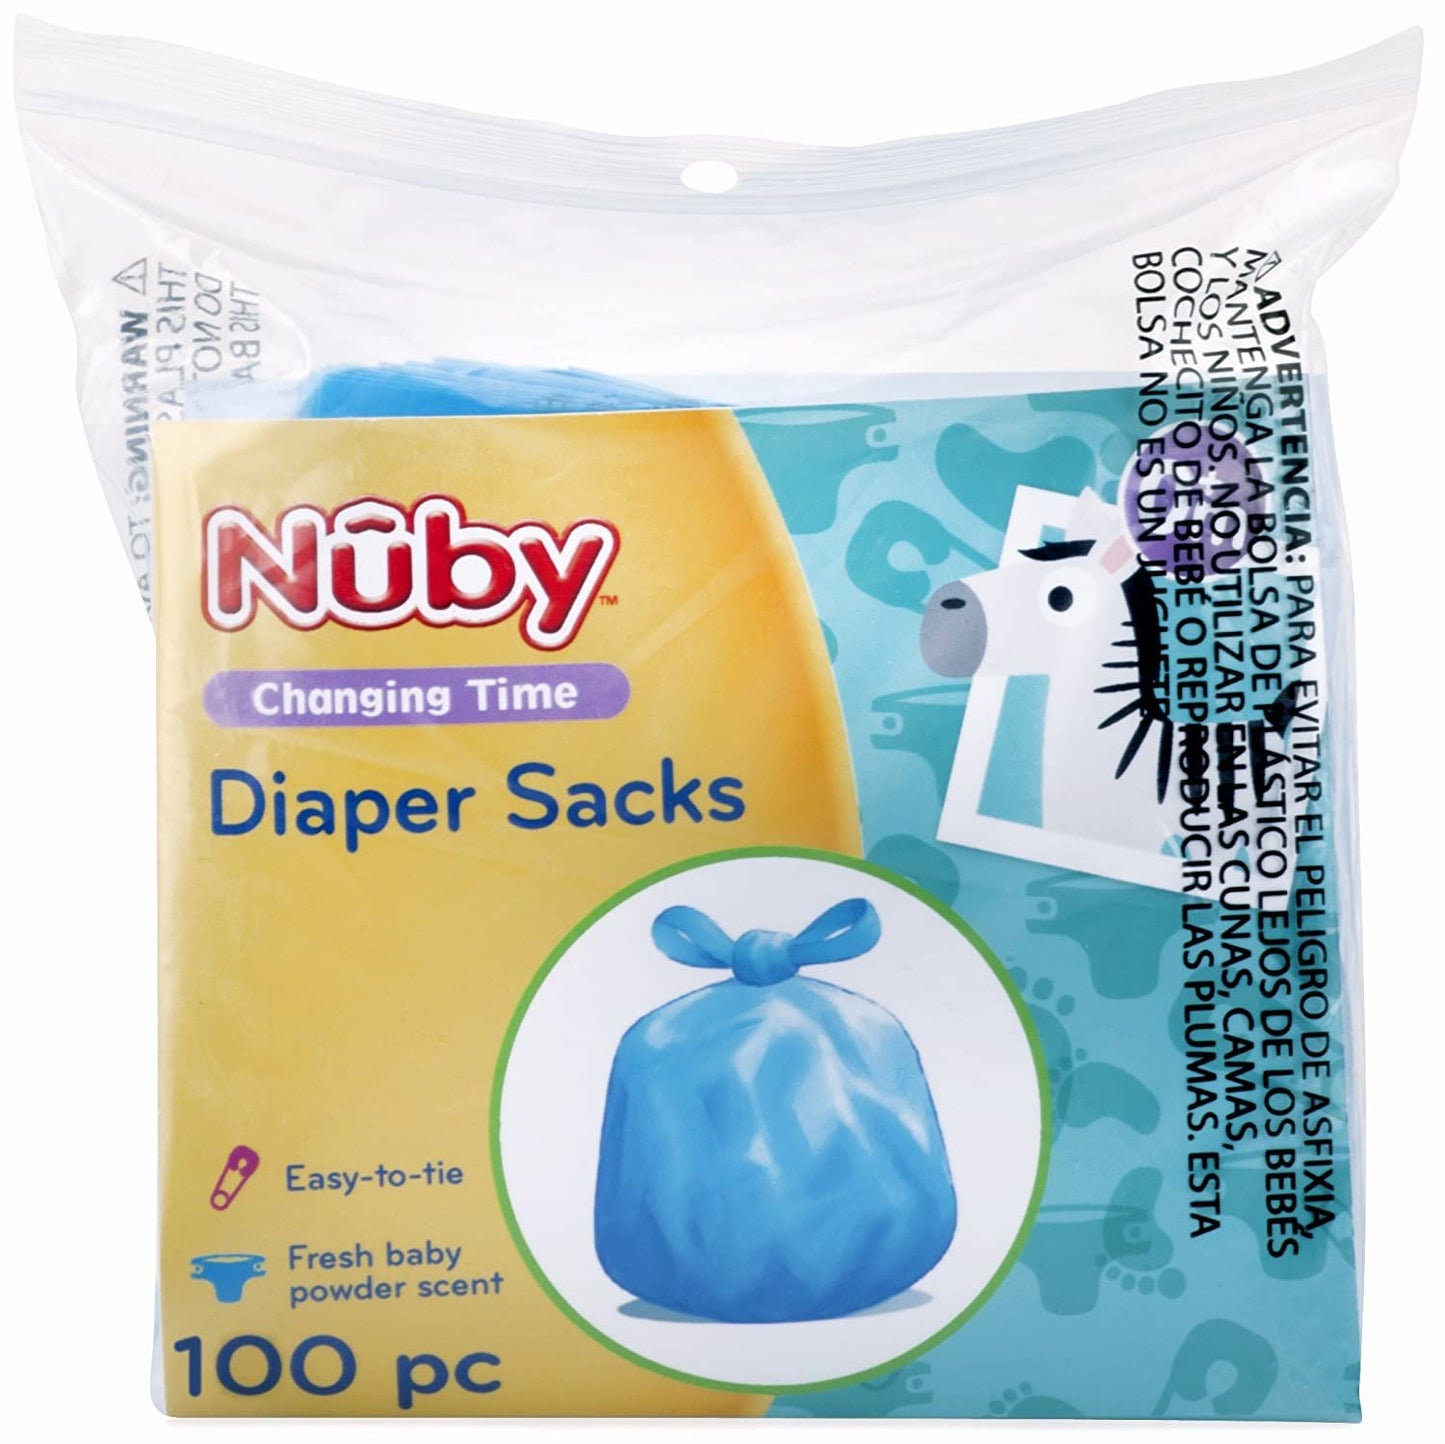 Nuby 100 Piece Disposable Diaper Sacks/Bags with Powder Scent, Blue